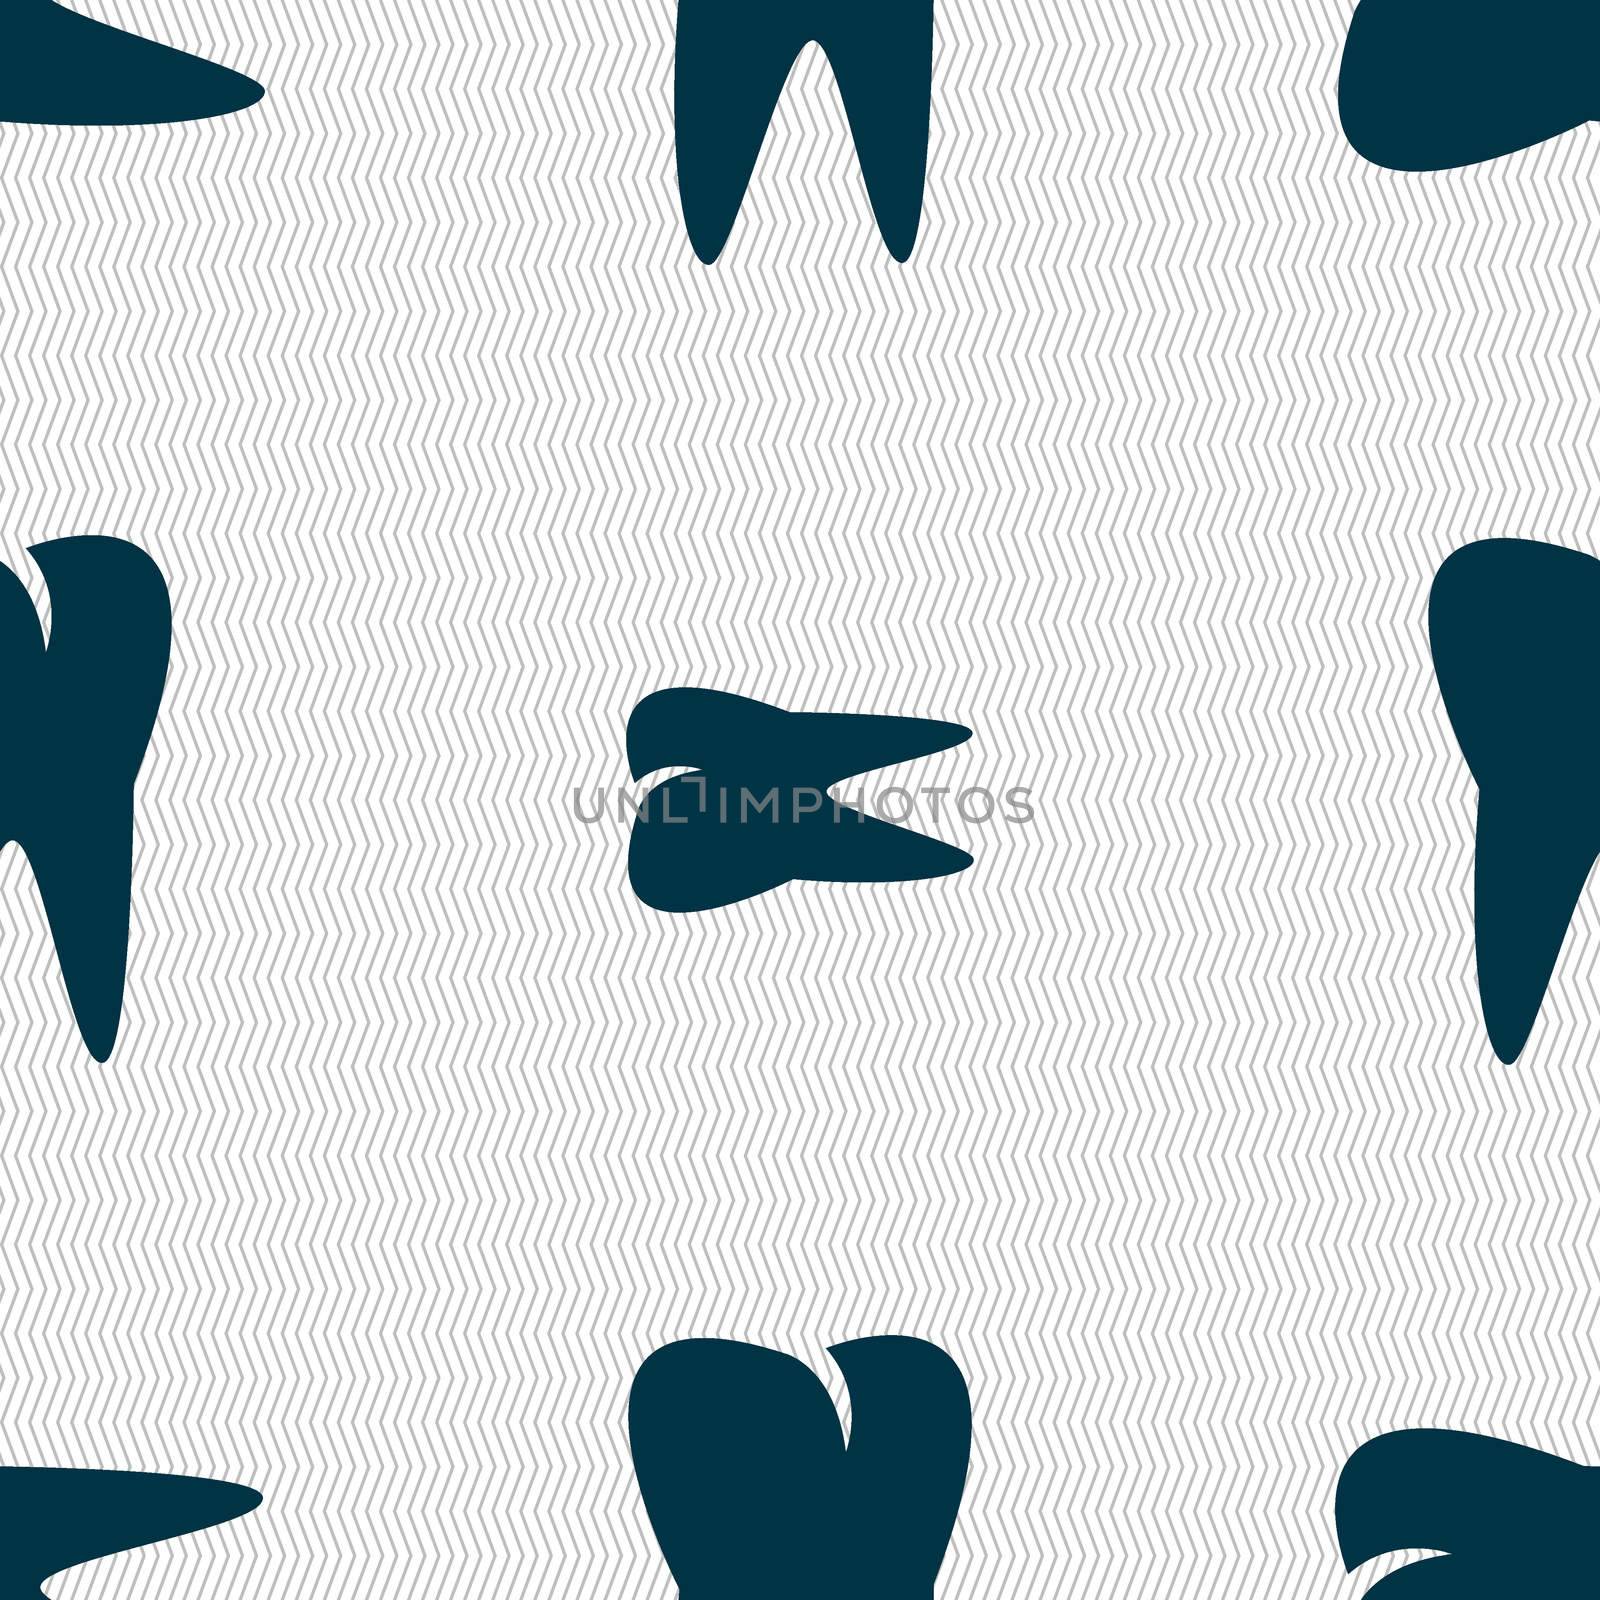 tooth icon. Seamless abstract background with geometric shapes. illustration